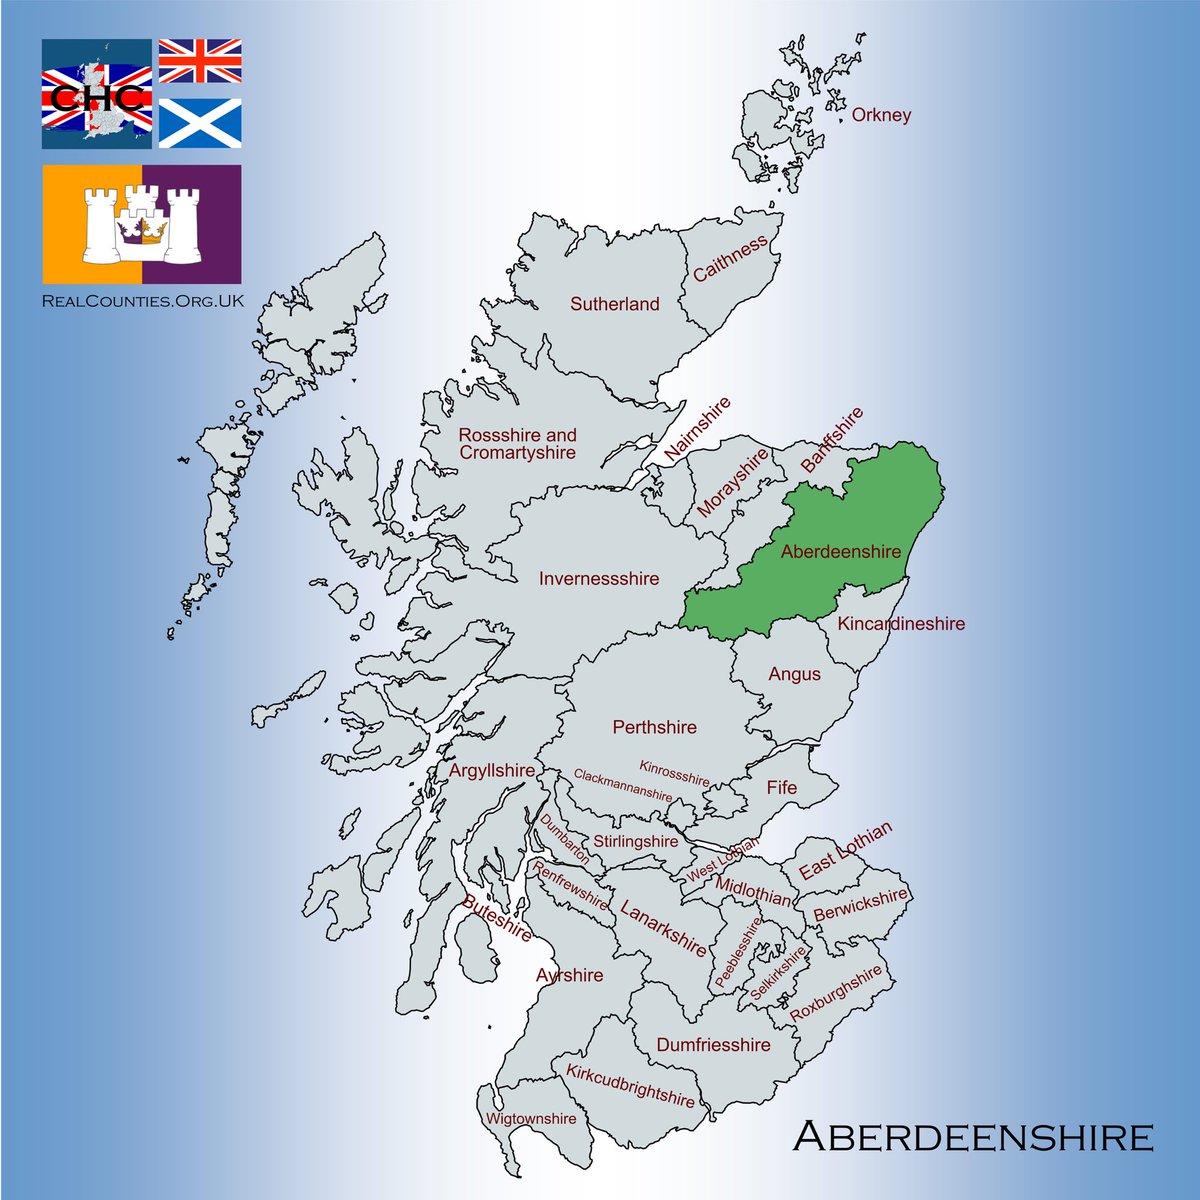 The County of #Aberdeen is a shire in the Highlands of Scotland. Popular geography divides #Aberdeenshire into five districts: 1️⃣ Mar 2️⃣ Formartine 3️⃣ Buchan 4️⃣ Garioch 5️⃣ Strathbogie It has a coast-line of 65 miles. 🇬🇧 #HistoricCounties | #RealCounties 🏴󠁧󠁢󠁳󠁣󠁴󠁿